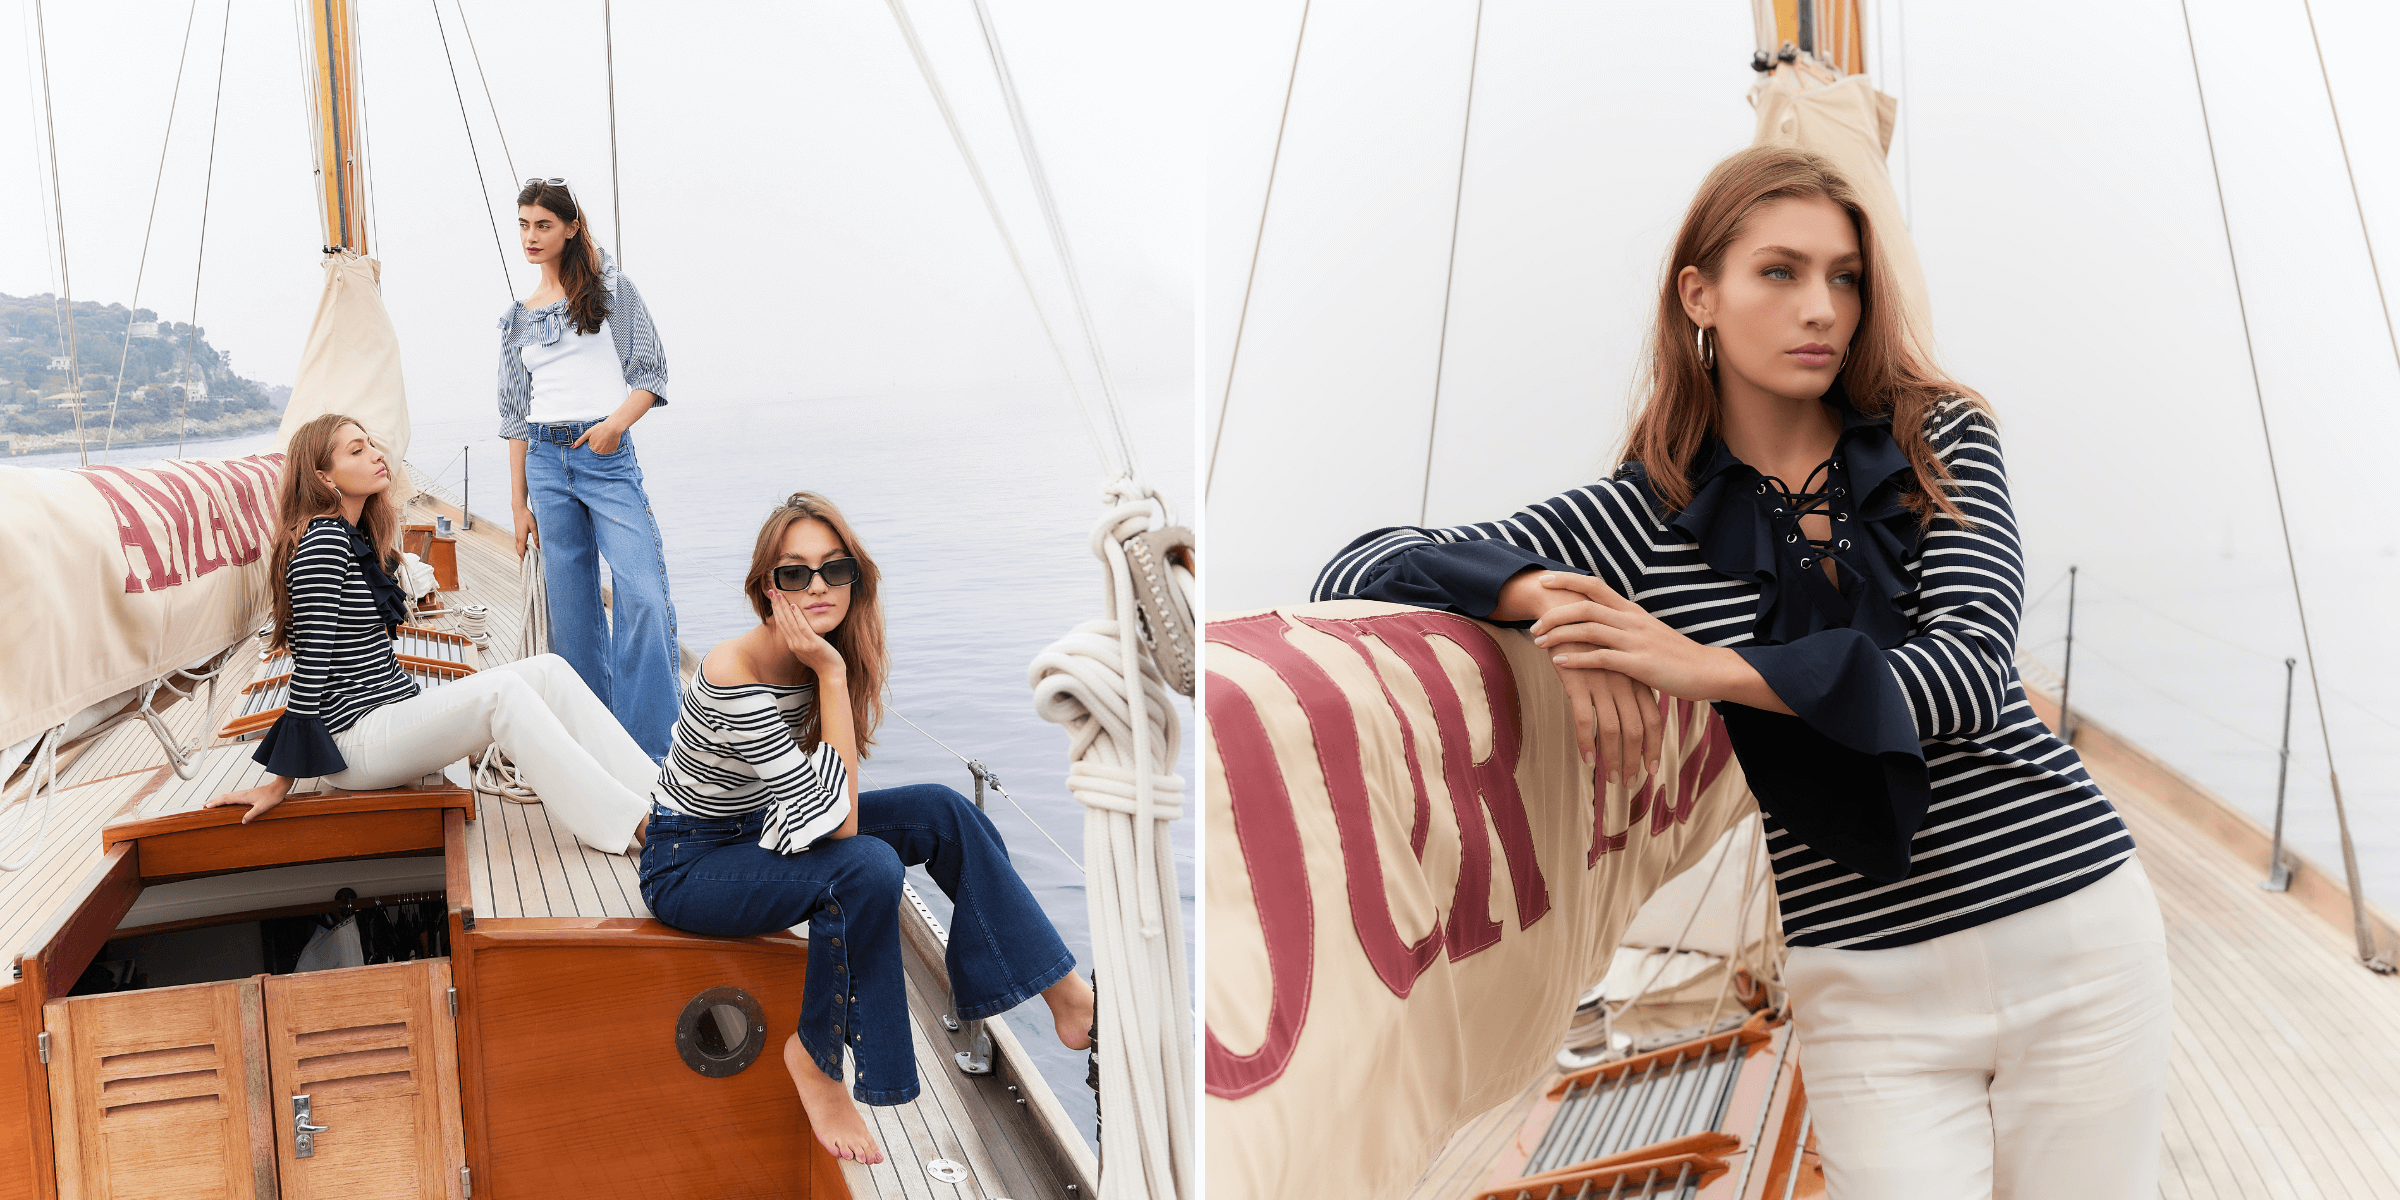 Whether you go for simple and casual or uptown chic, the Breton-stripe top is a classic staple that's always in season.